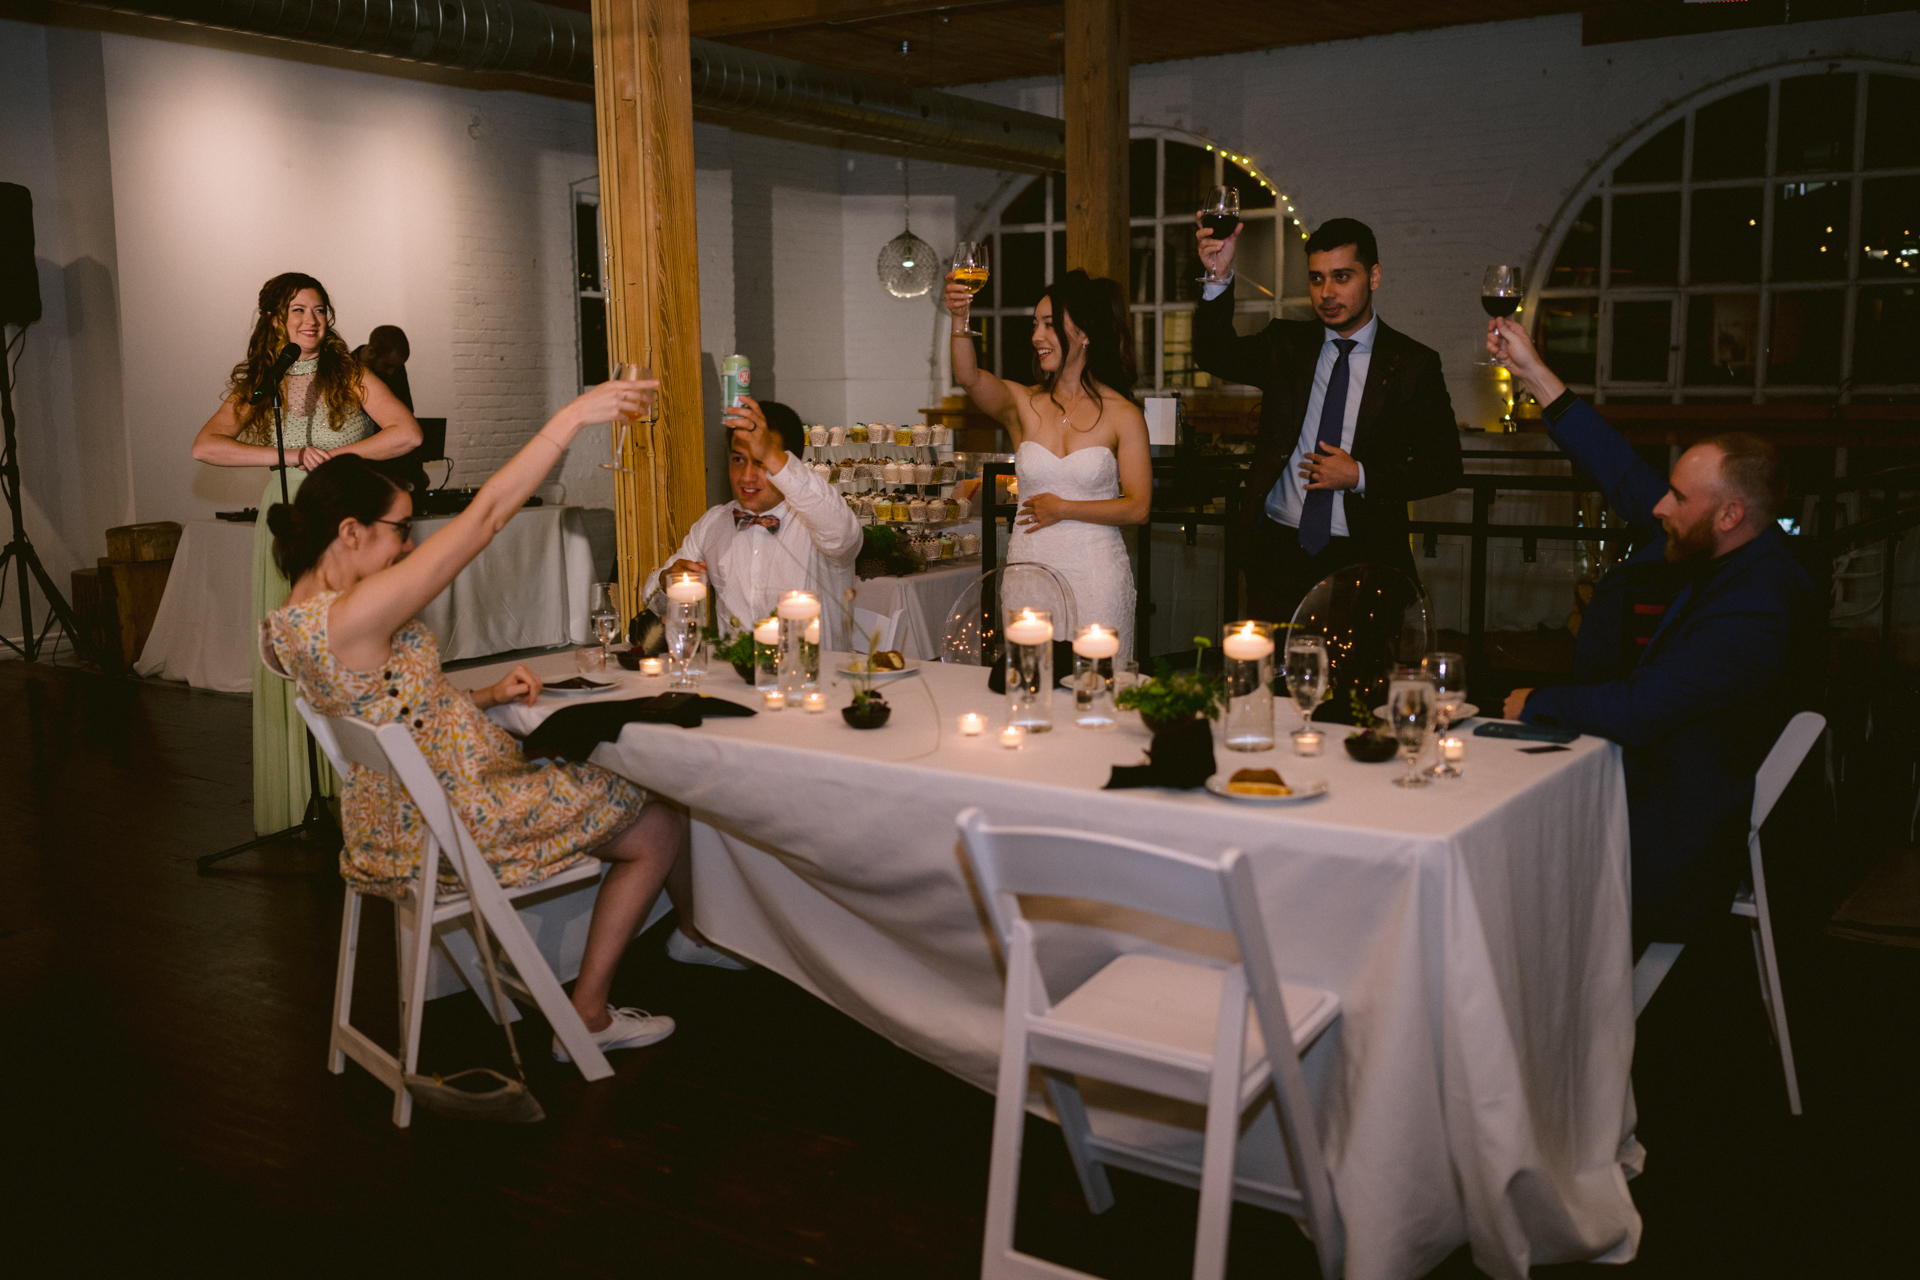 Guests toasting with wine glasses at a wedding